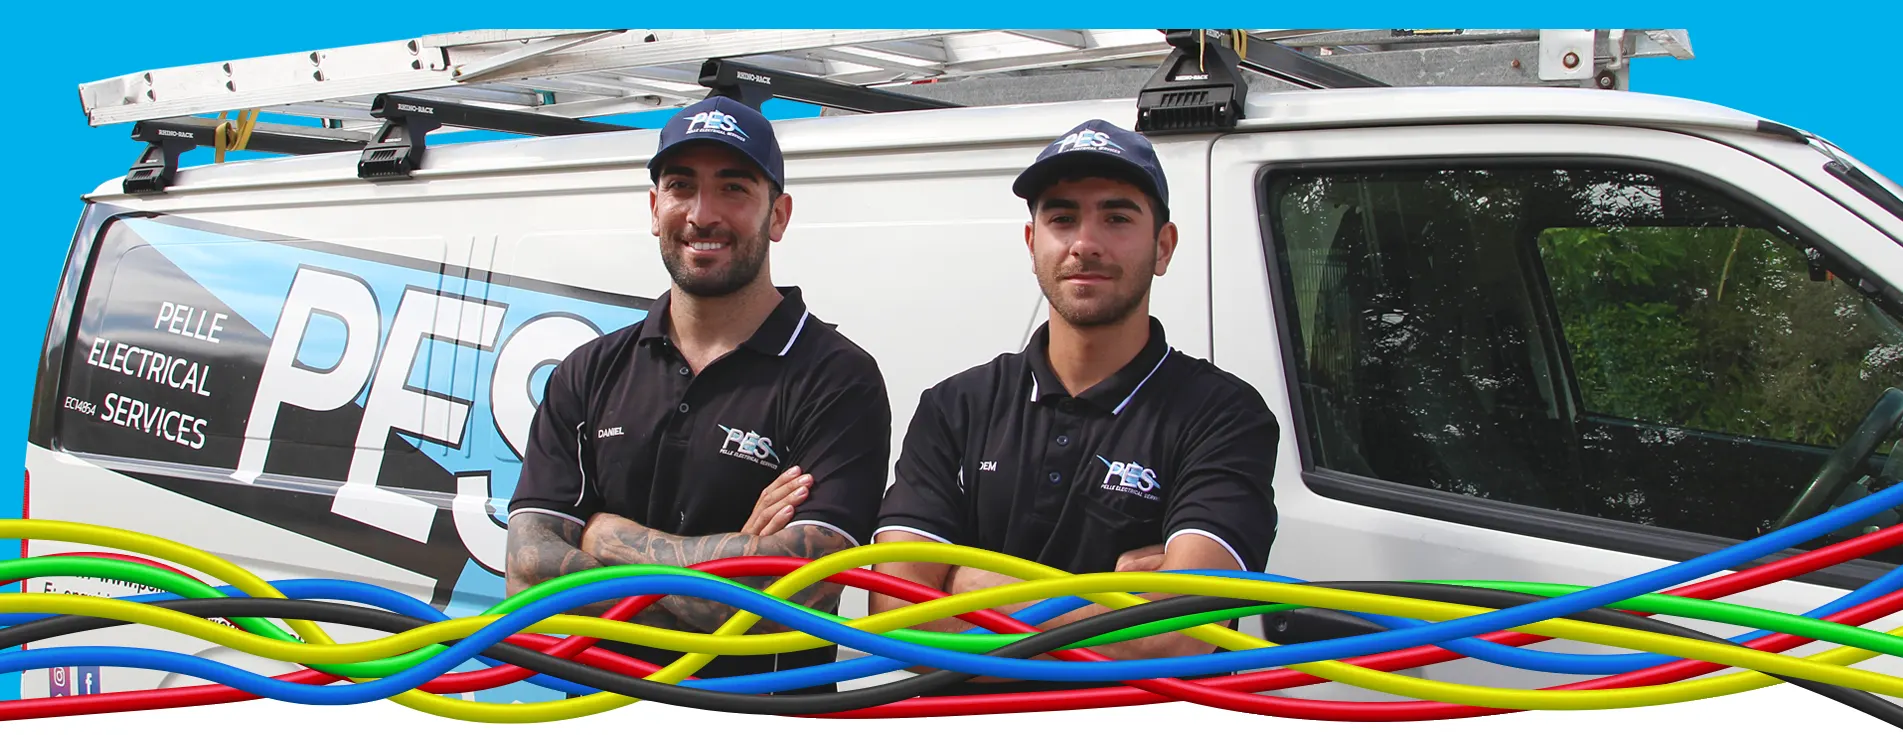 SERVICES PELLE ELECTRICAL PES ELECTRICAL SERVICES